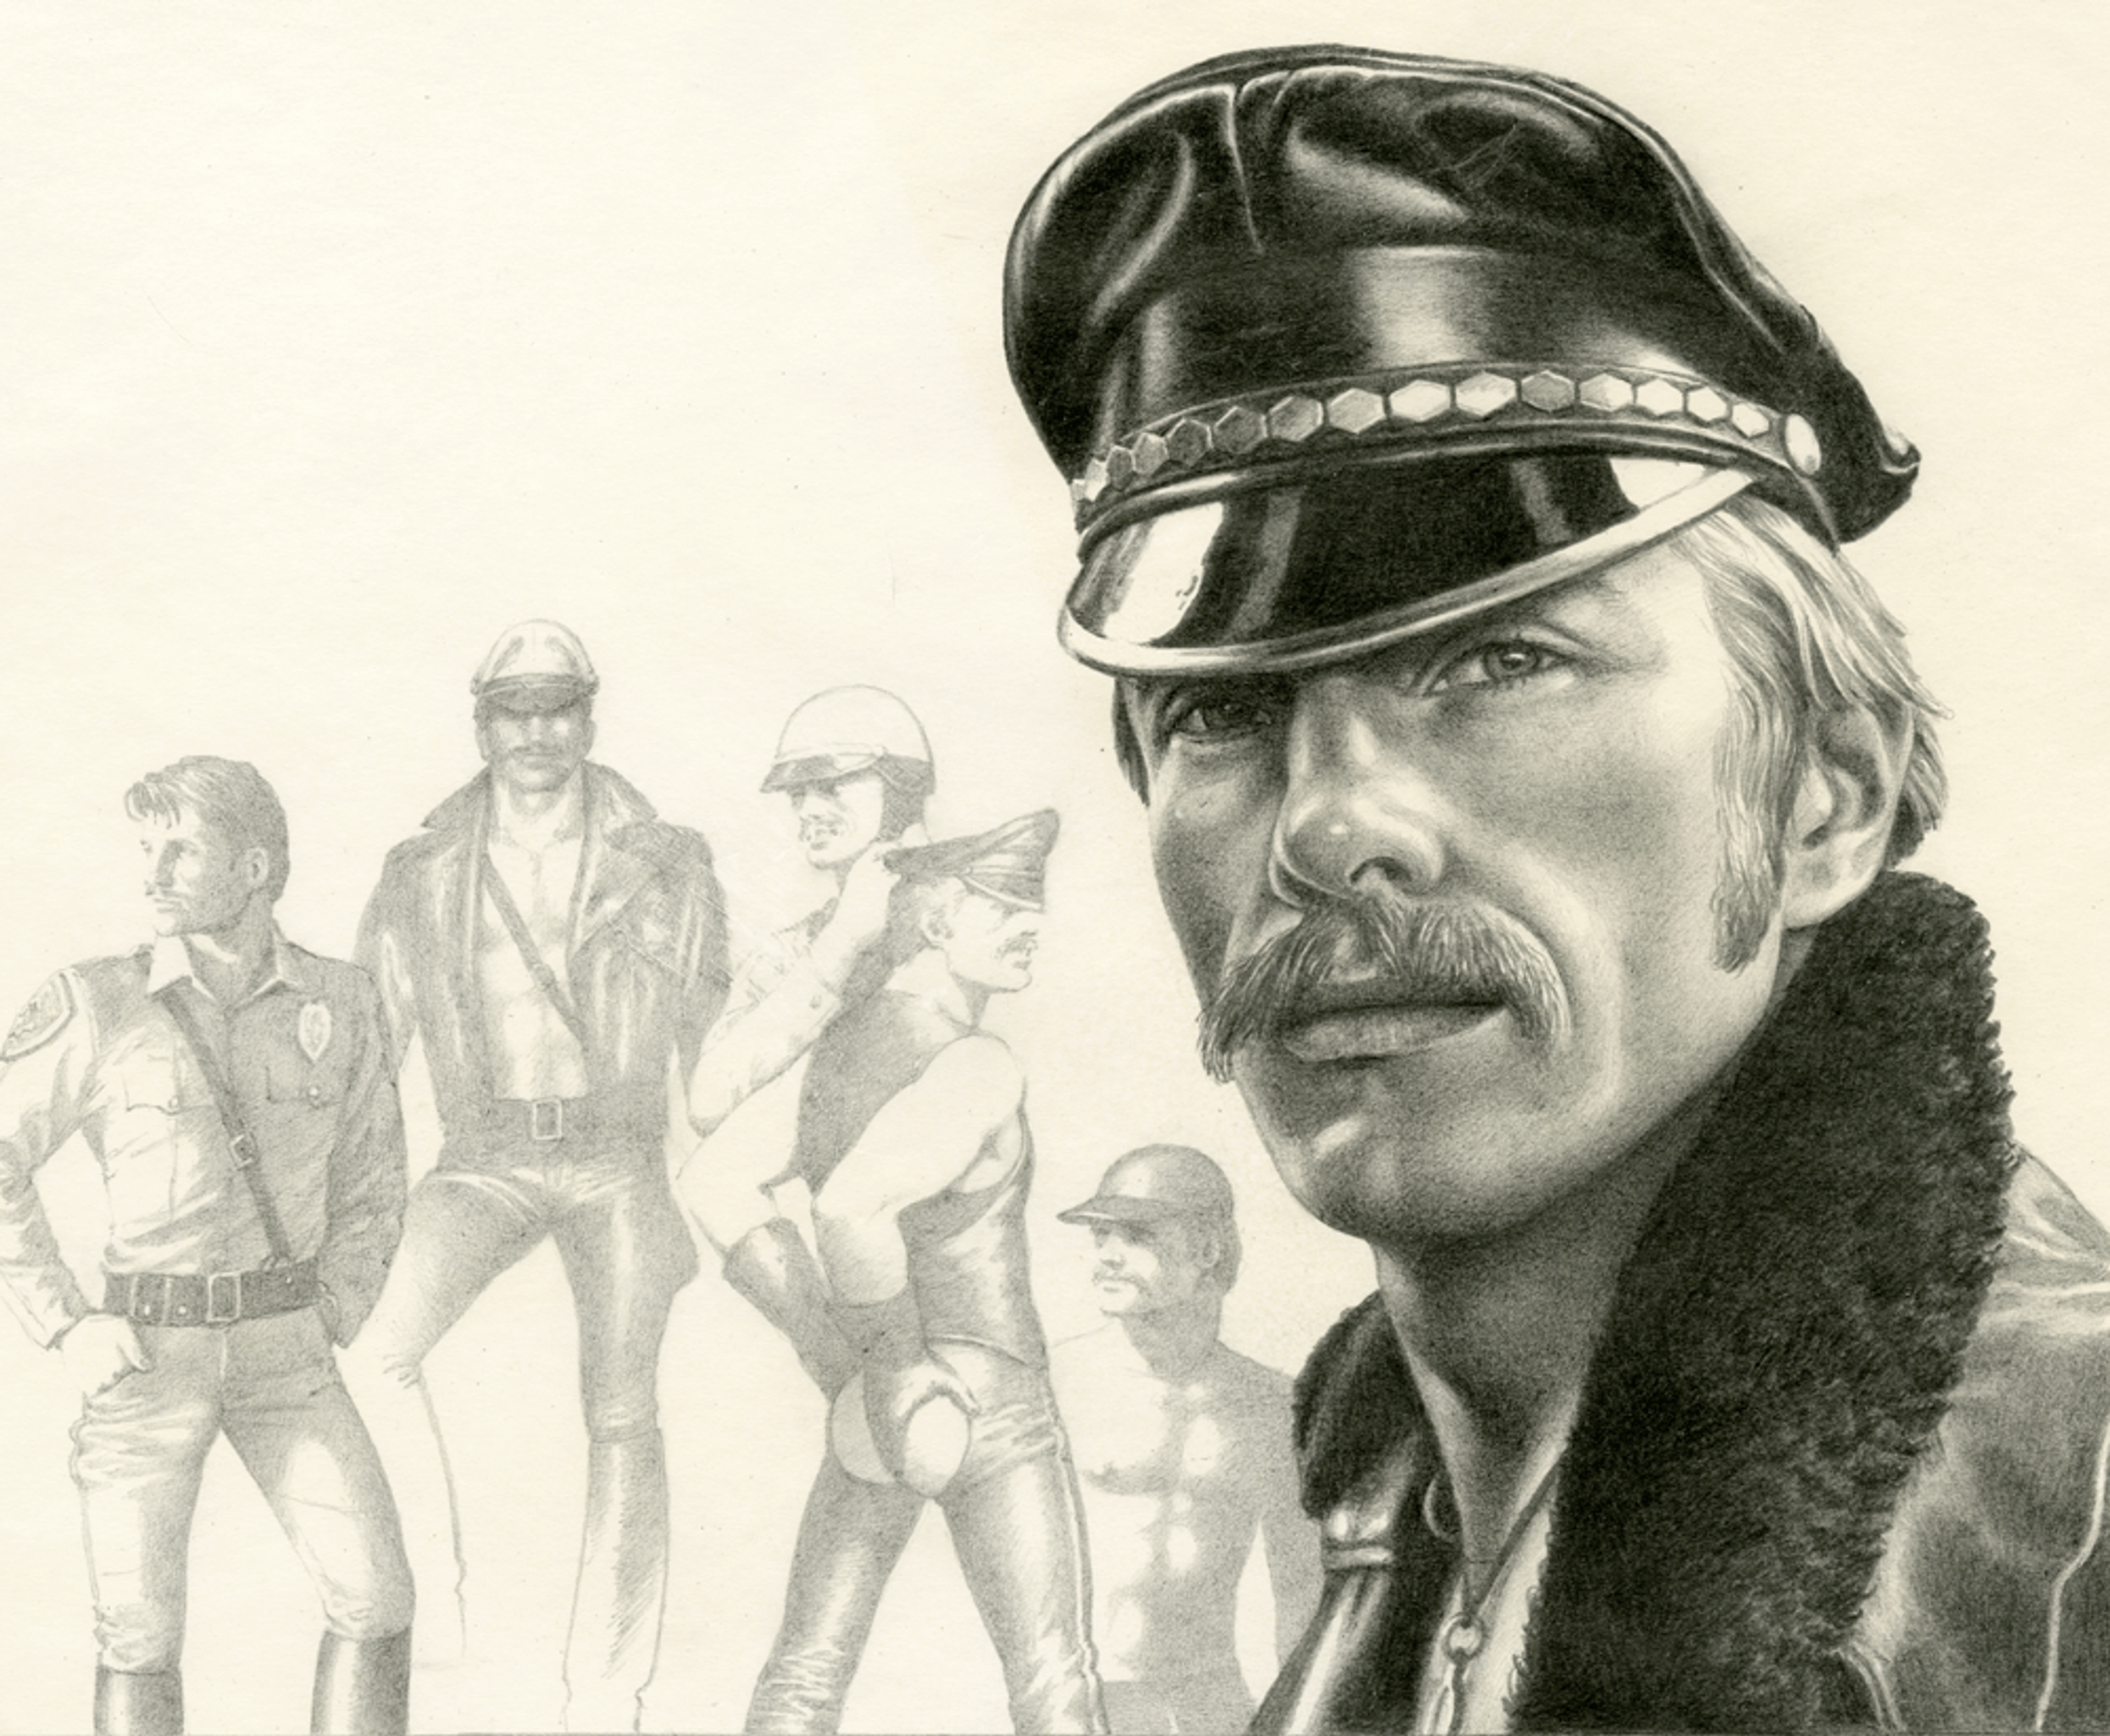 Pencil sketch of a portrait on a man with a moustache wearing a leather peaked cap. The background includes sketches of a number of well-built men posing